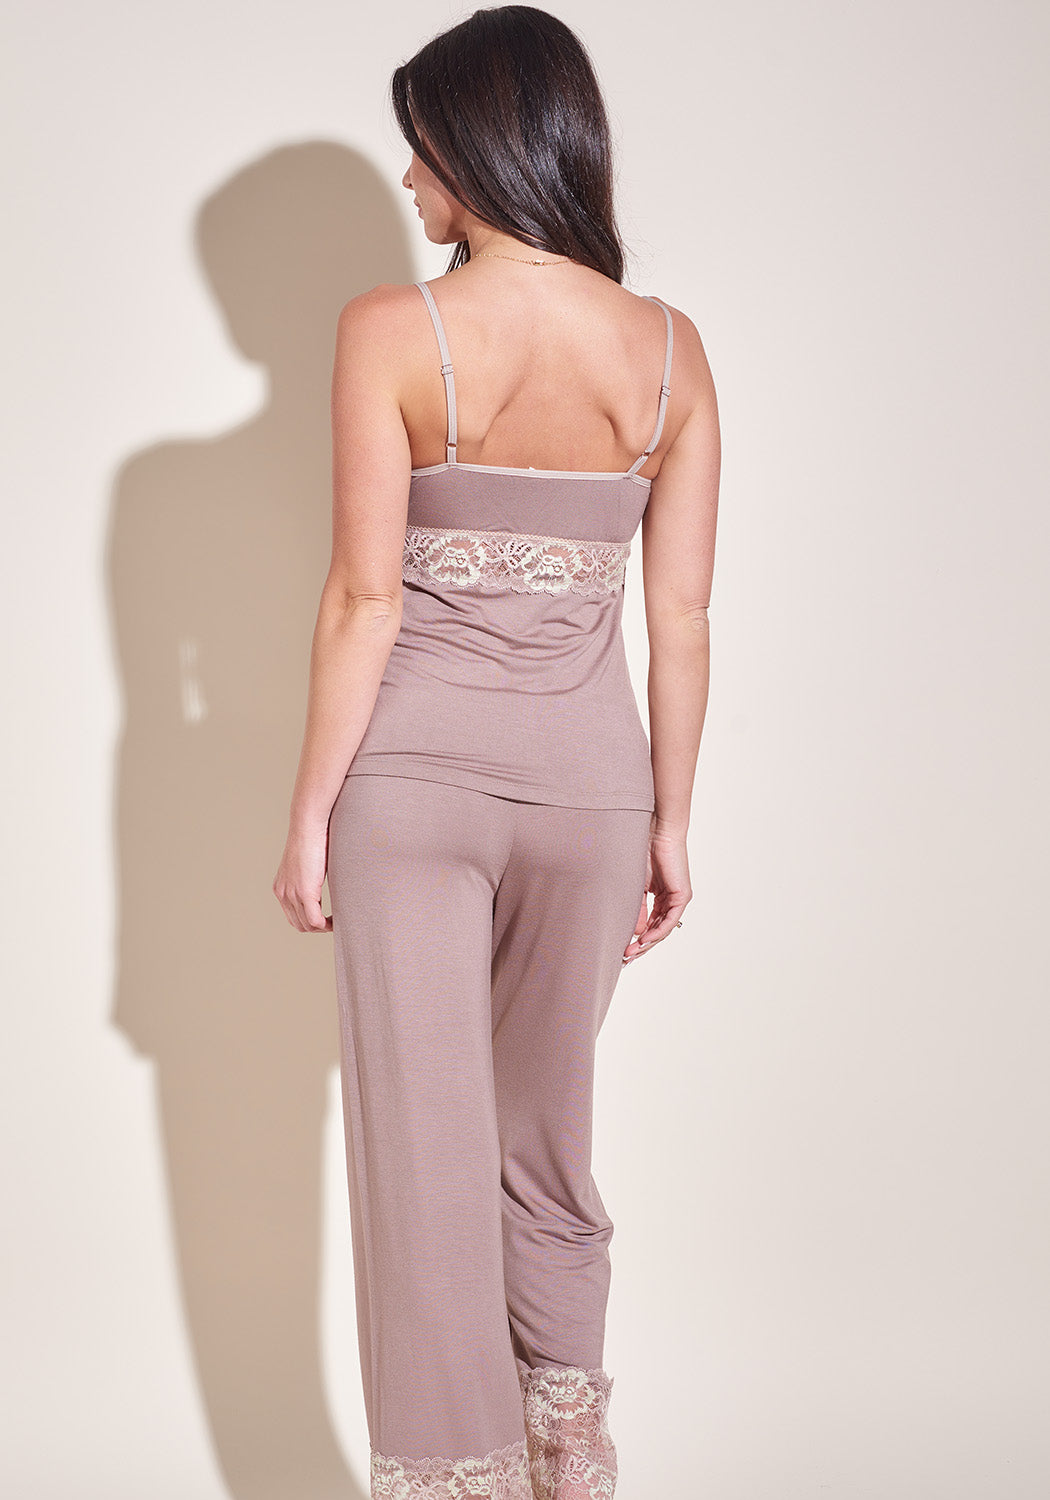 Belucci Camisole and Drawstring Pant Set in TENCEL™ Modal Celedon Taupe